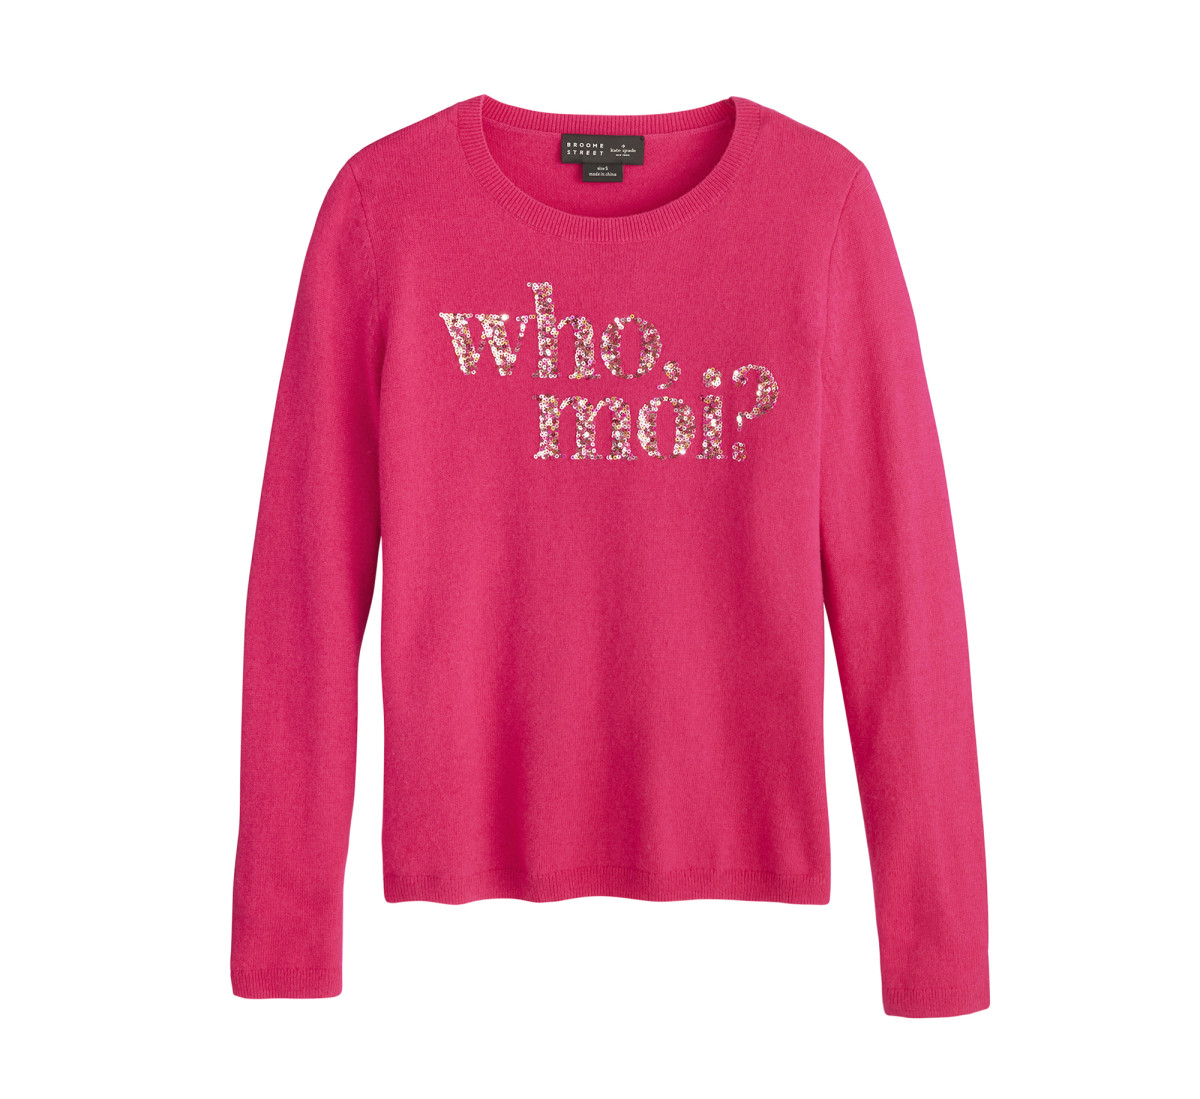 A sweater from the Kate Spade New York x Miss Piggy collaboration. Photo: Courtesy